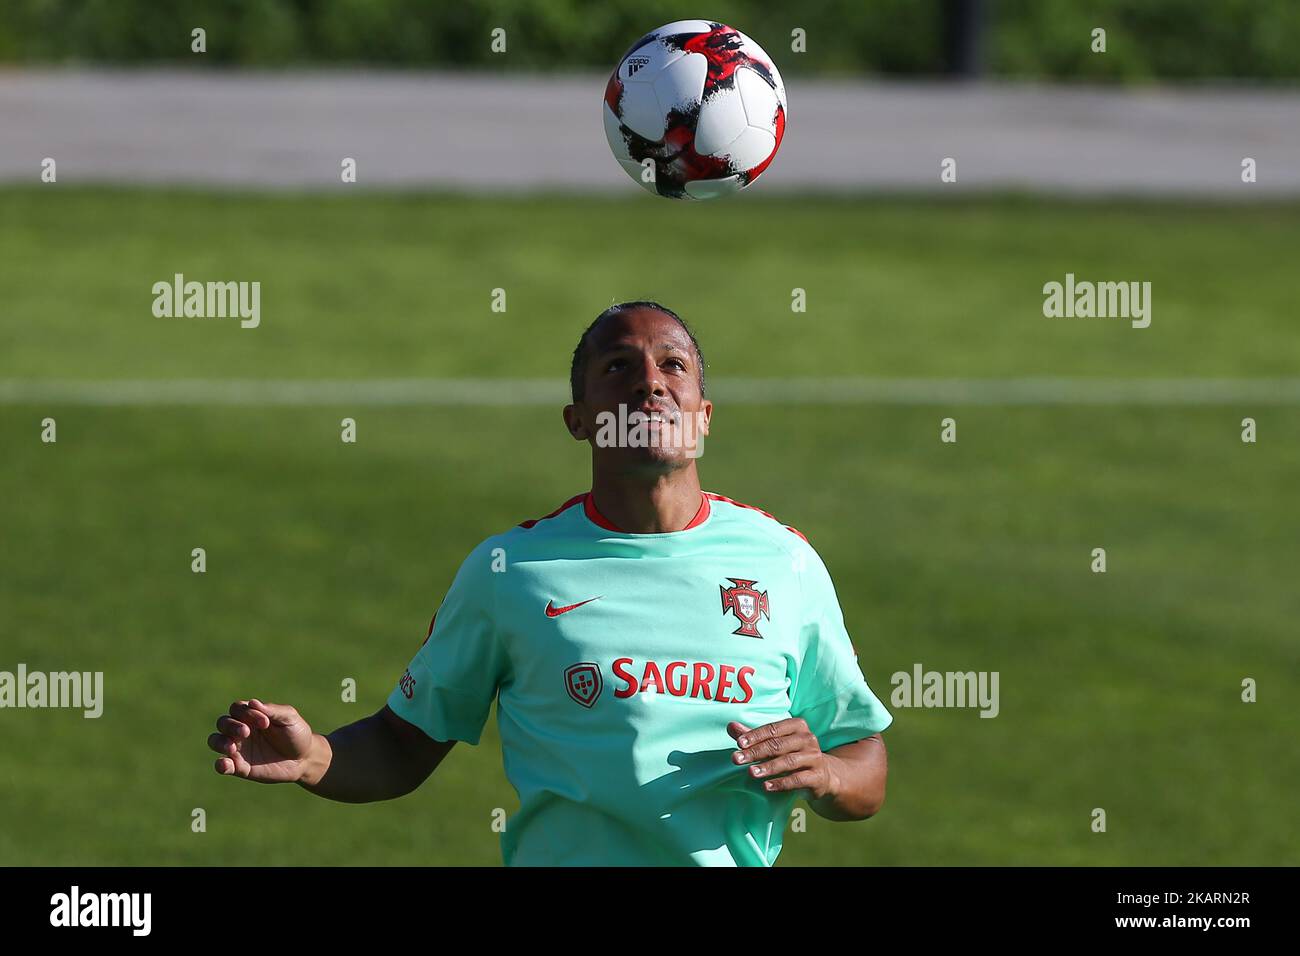 Portugal's defender Bruno Alves in action during National Team Training session before the match between Portugal and Andorra at City Football in Oeiras, Lisbon, Portugal on October 3, 2017. (Photo by Bruno Barros / DPI / NurPhoto) Stock Photo